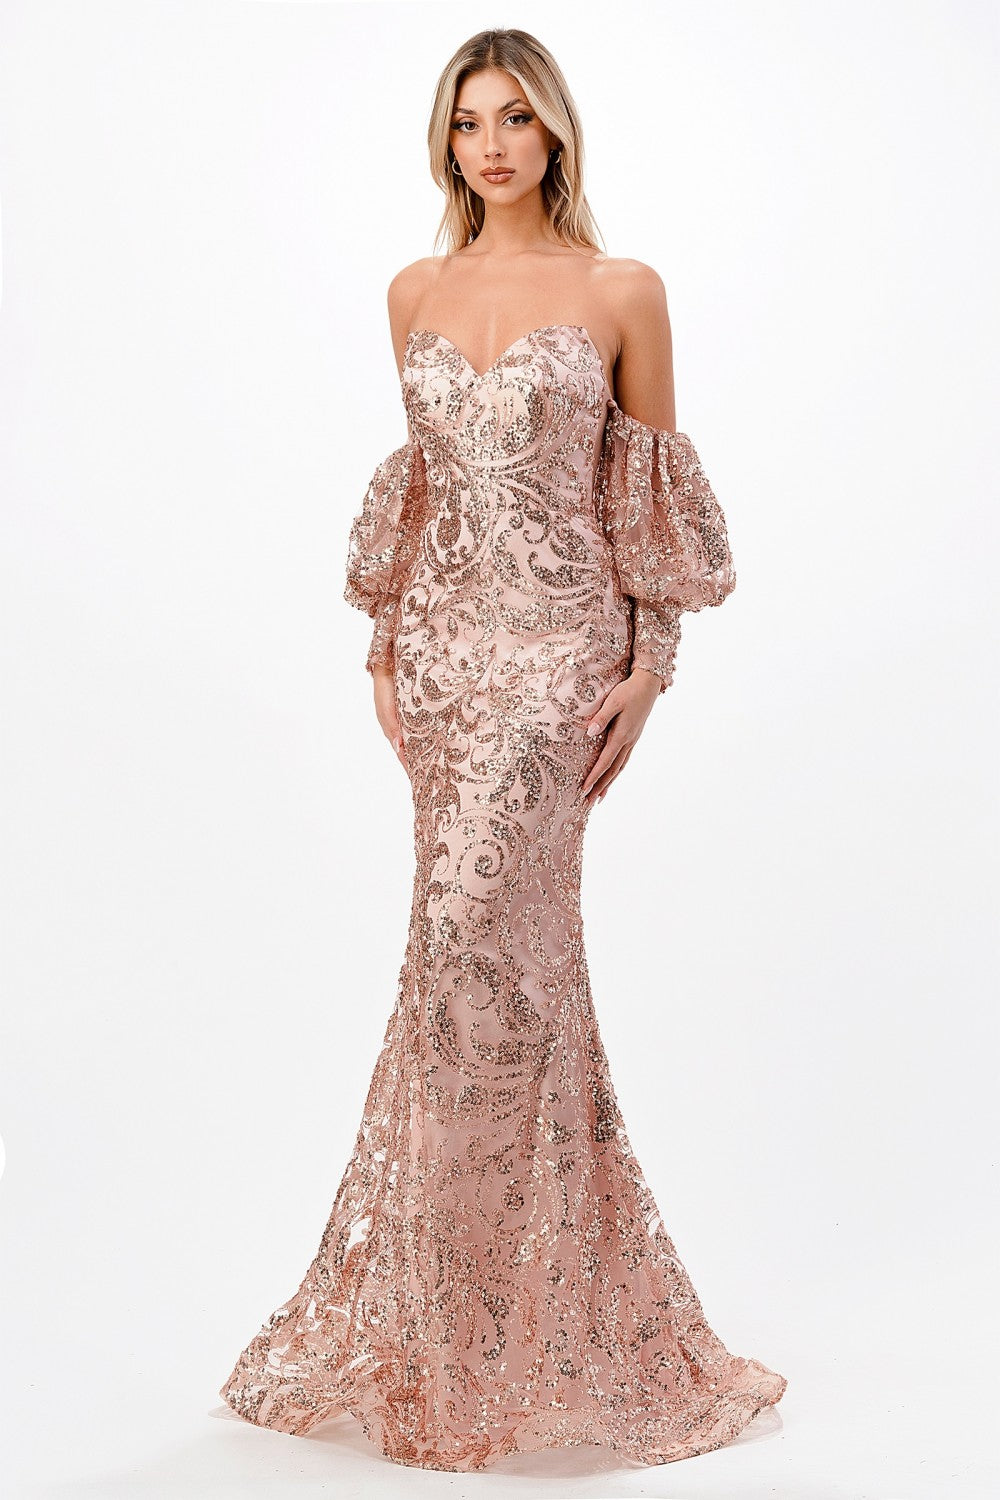 CD J820 - Strapless Glitter Print Fit & Flare Prom Gown with Sweetheart Neck Sheer Underarm Panels & Removable Sleeves Prom Gown Cinderella Divine 6 ROSE GOLD 